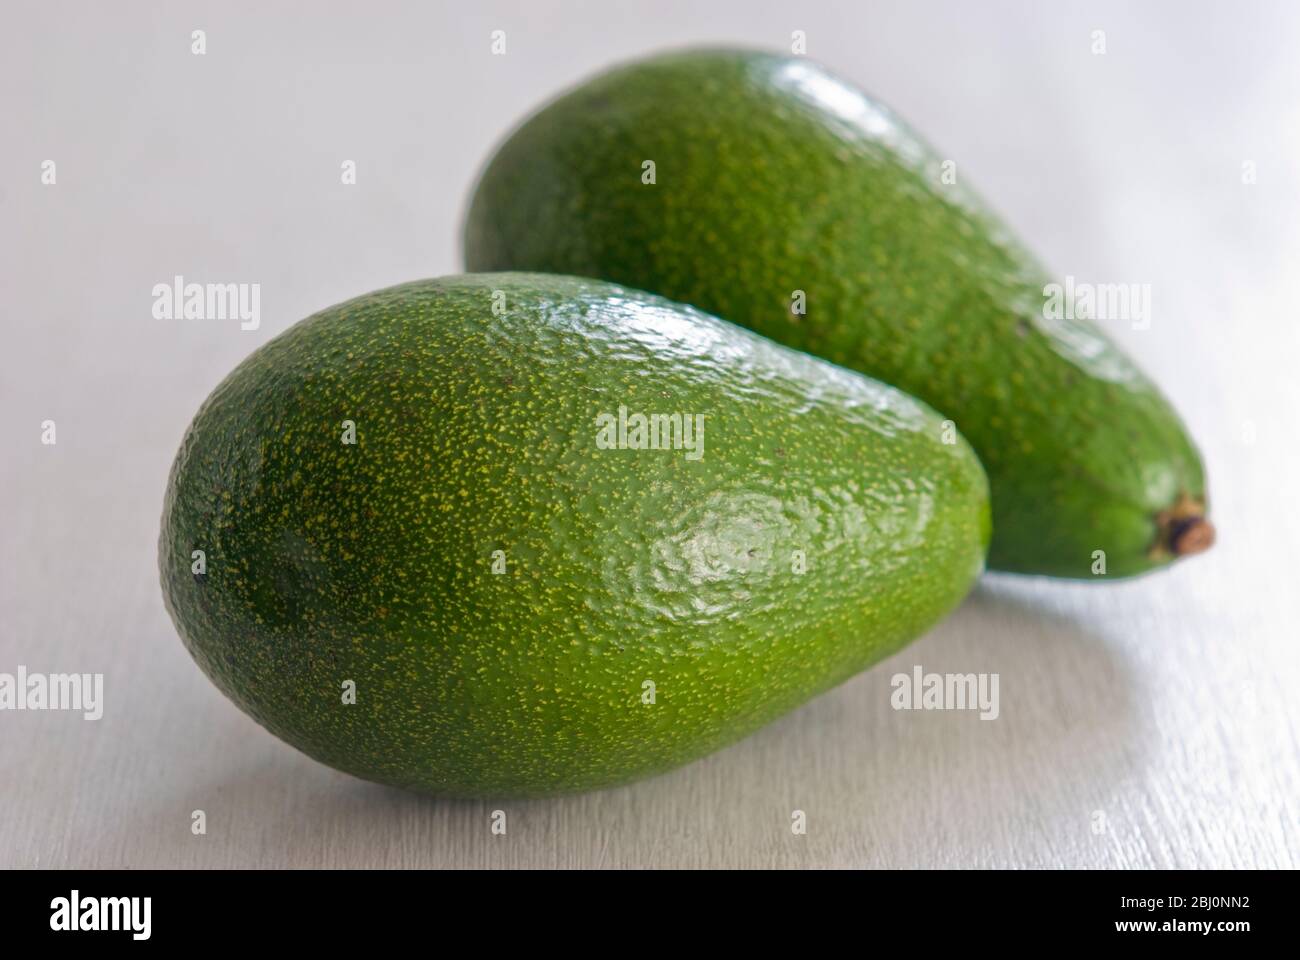 Two Fuerte variety avocadoes on white background surface - Stock Photo